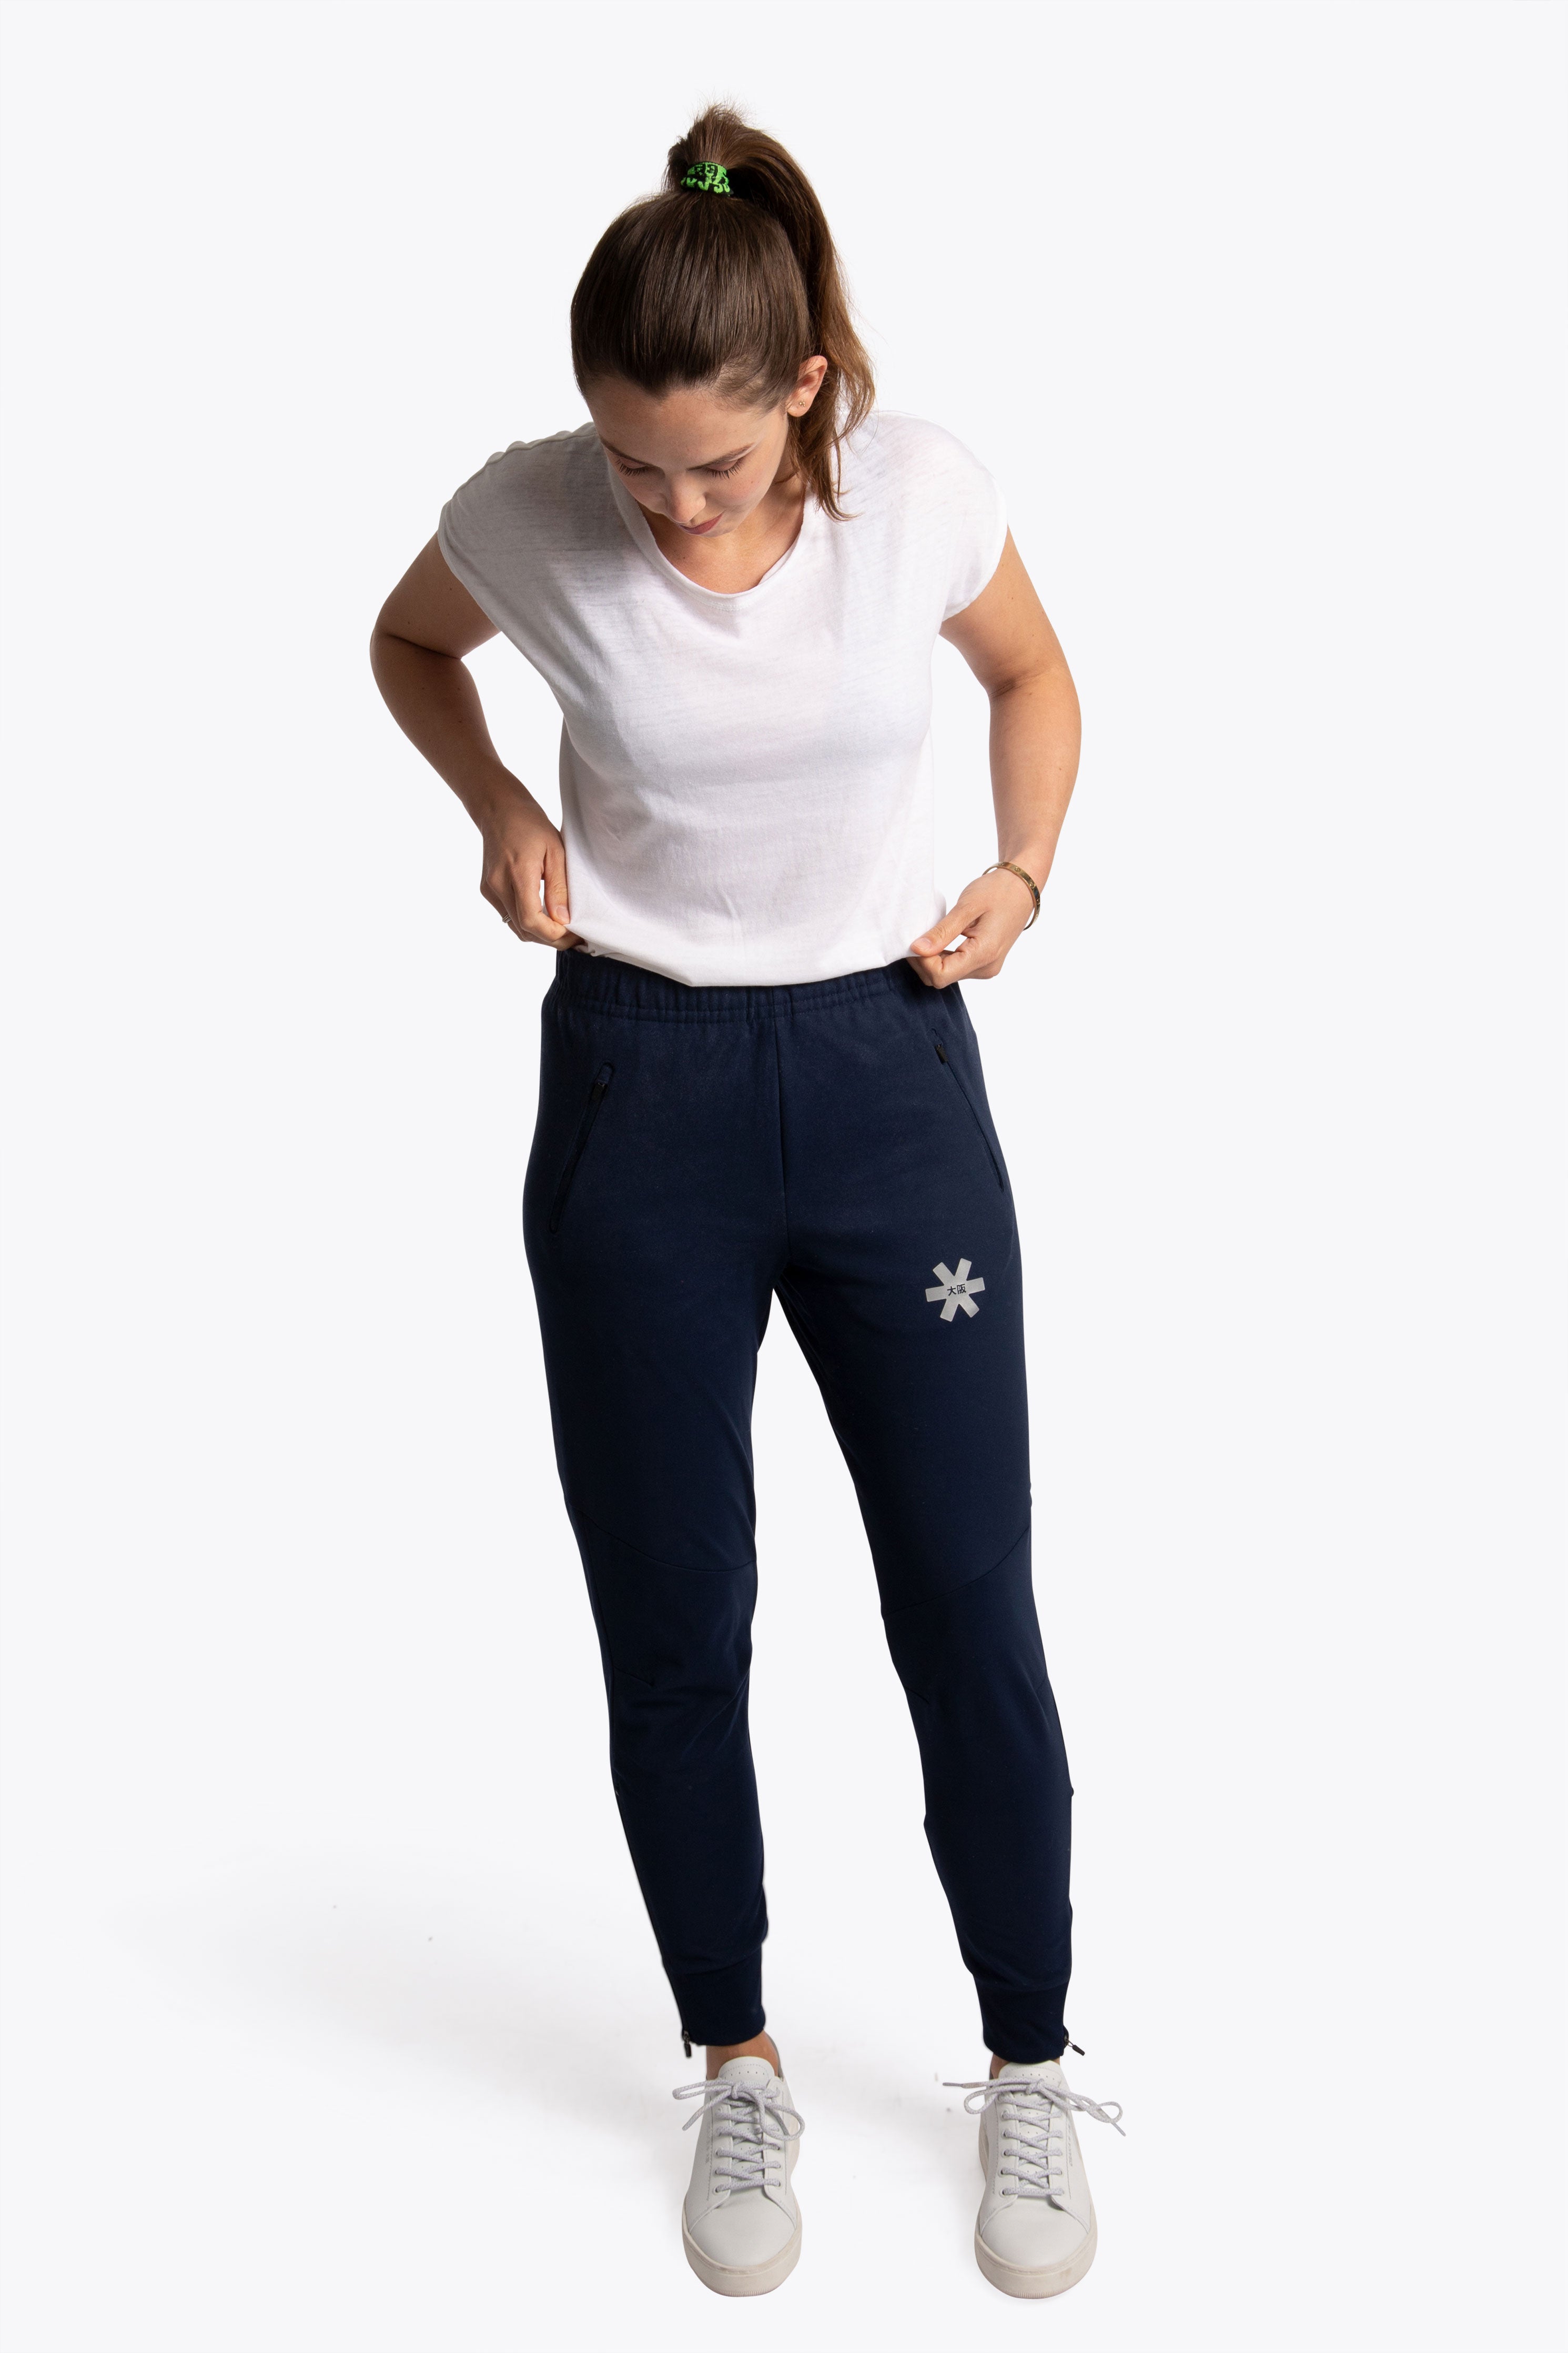 Women Converse Track Pants - Buy Women Converse Track Pants online in India